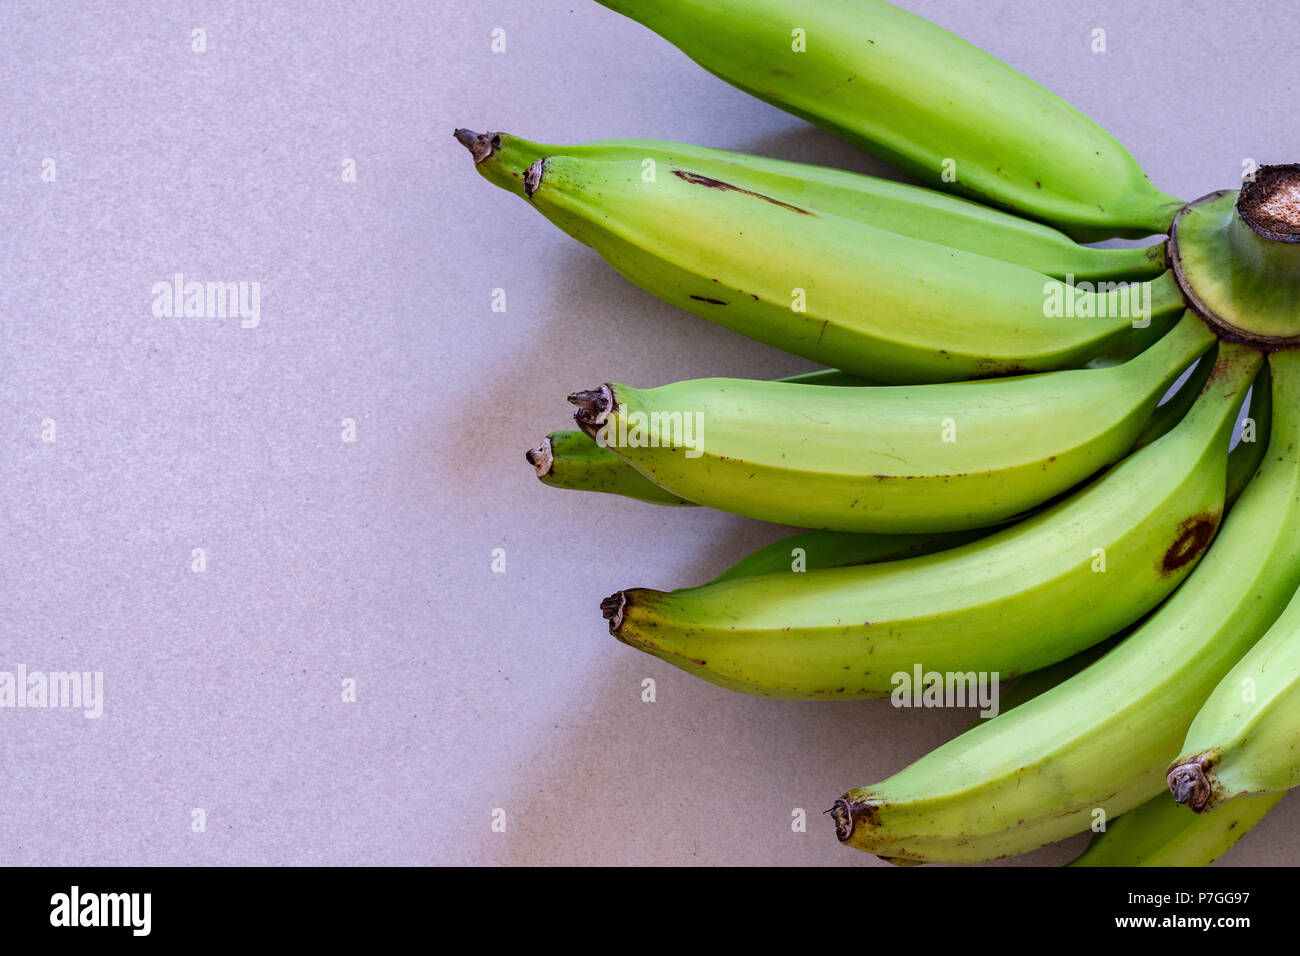 A bunch of young green plantain which resemble bananas, but are larger in size. Can be fried, baked, grilled, boiled either when green or ripened. Stock Photo